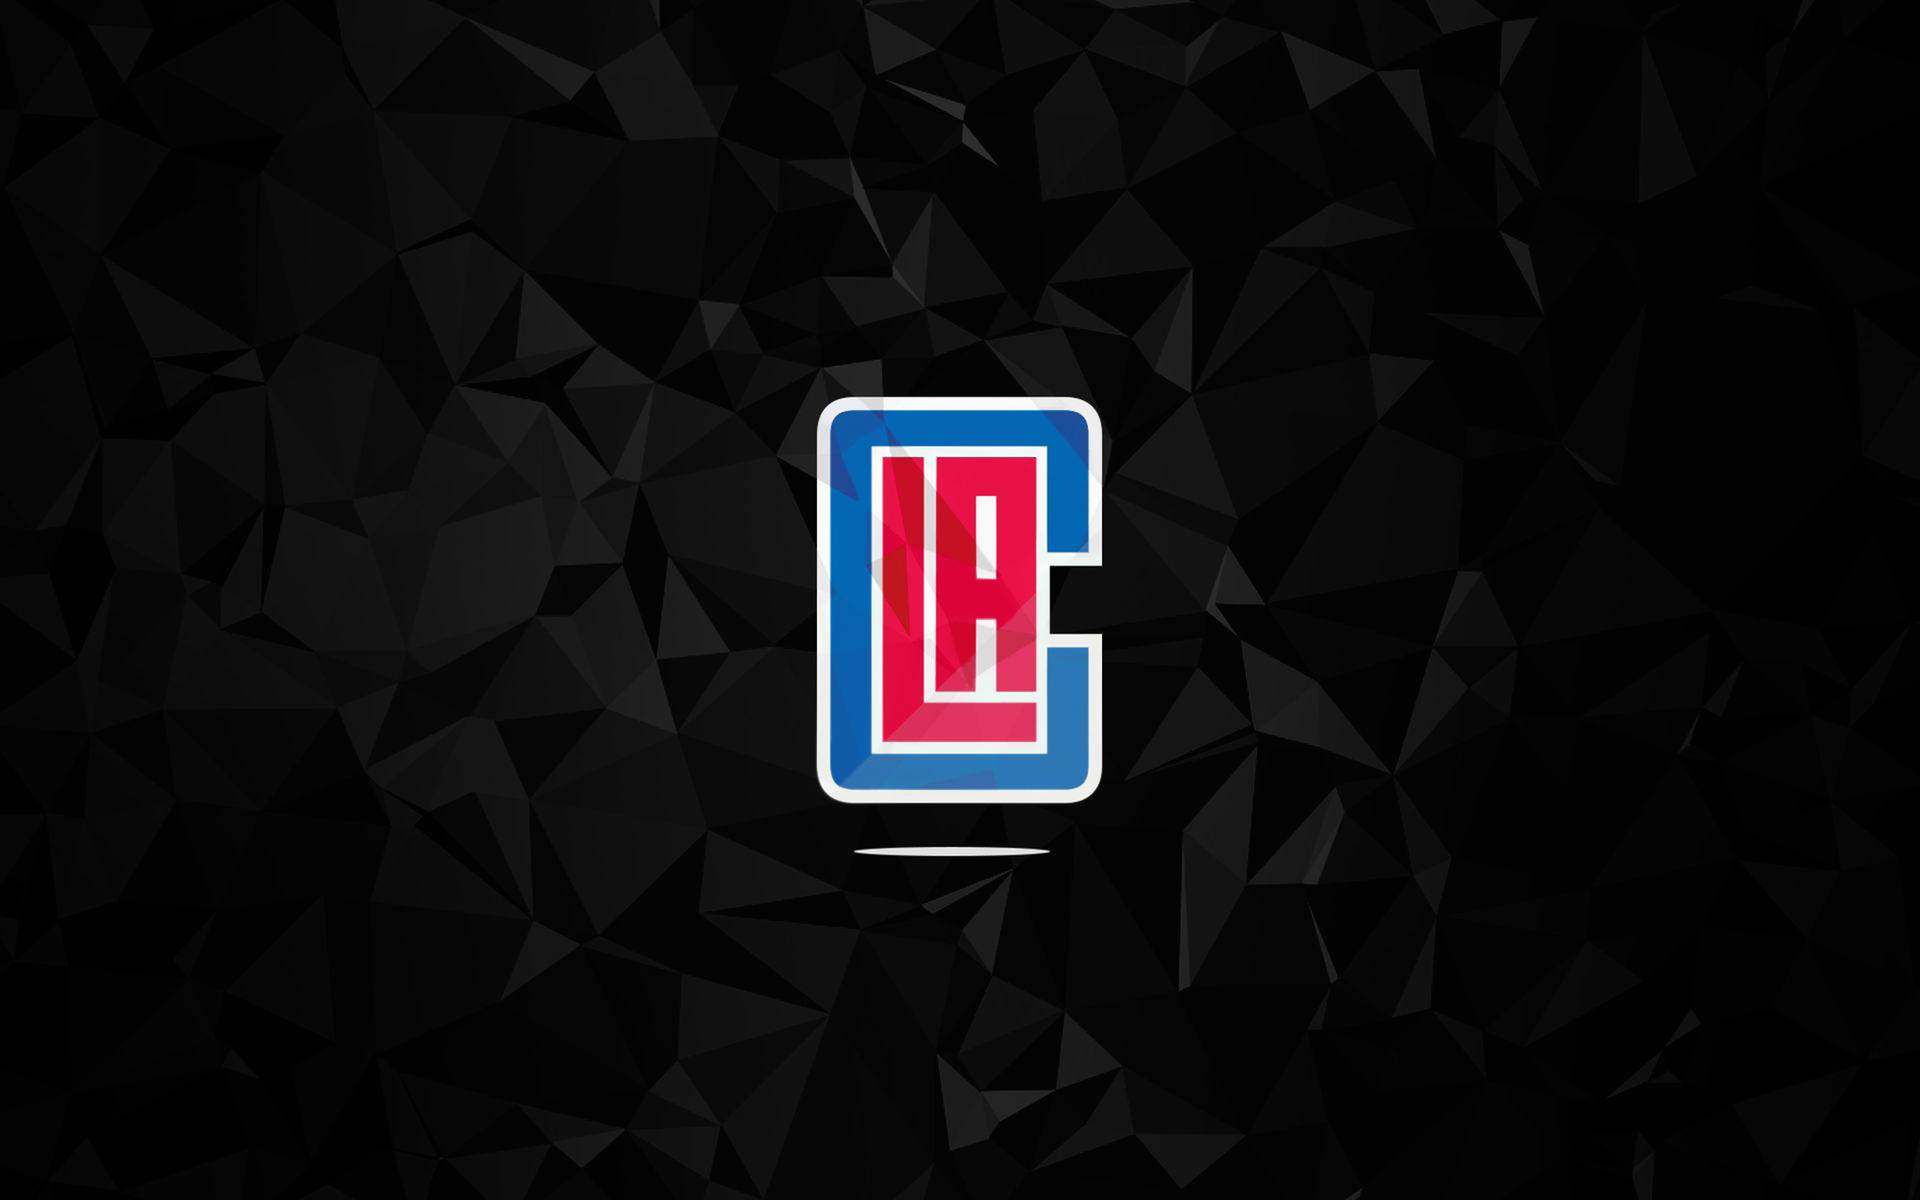 Los Angeles Clippers Triangular Pattern Wallpaper